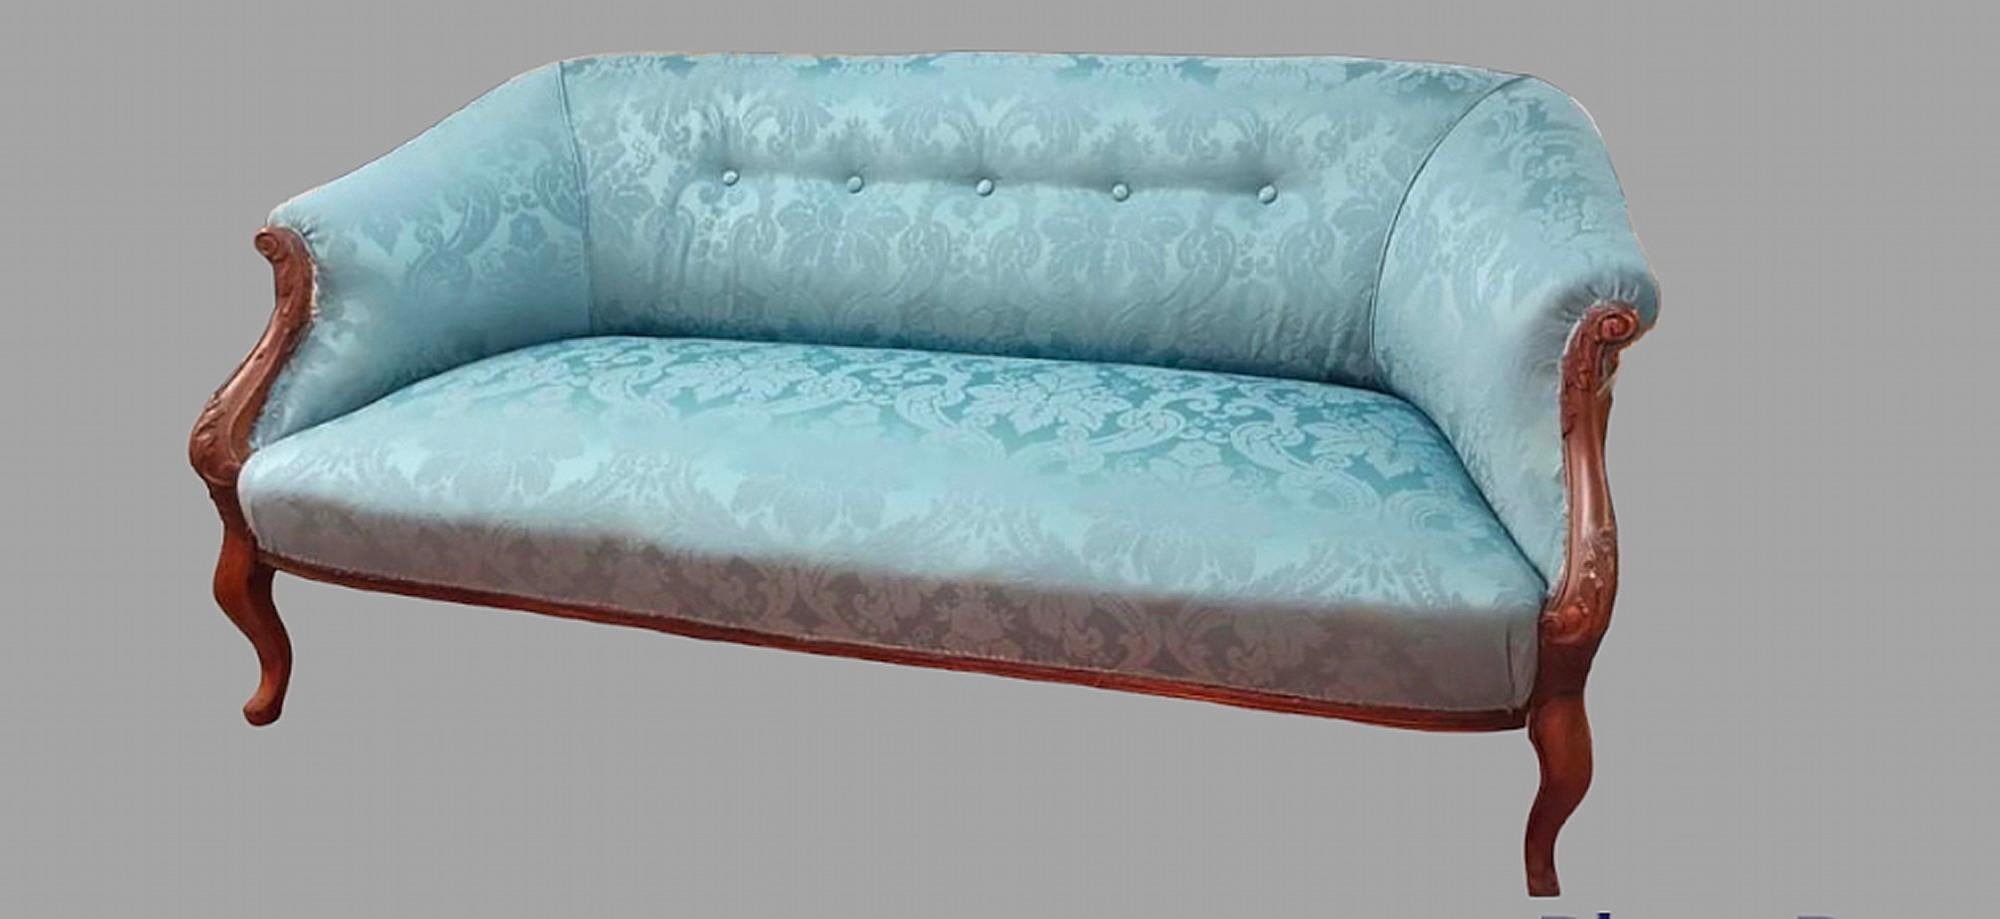 A French Mahogany sofa circa 1900 that has been reupholstered in a blue silk damask with scroll arms on cabriole front legs. Measure: seat height 36 cm.